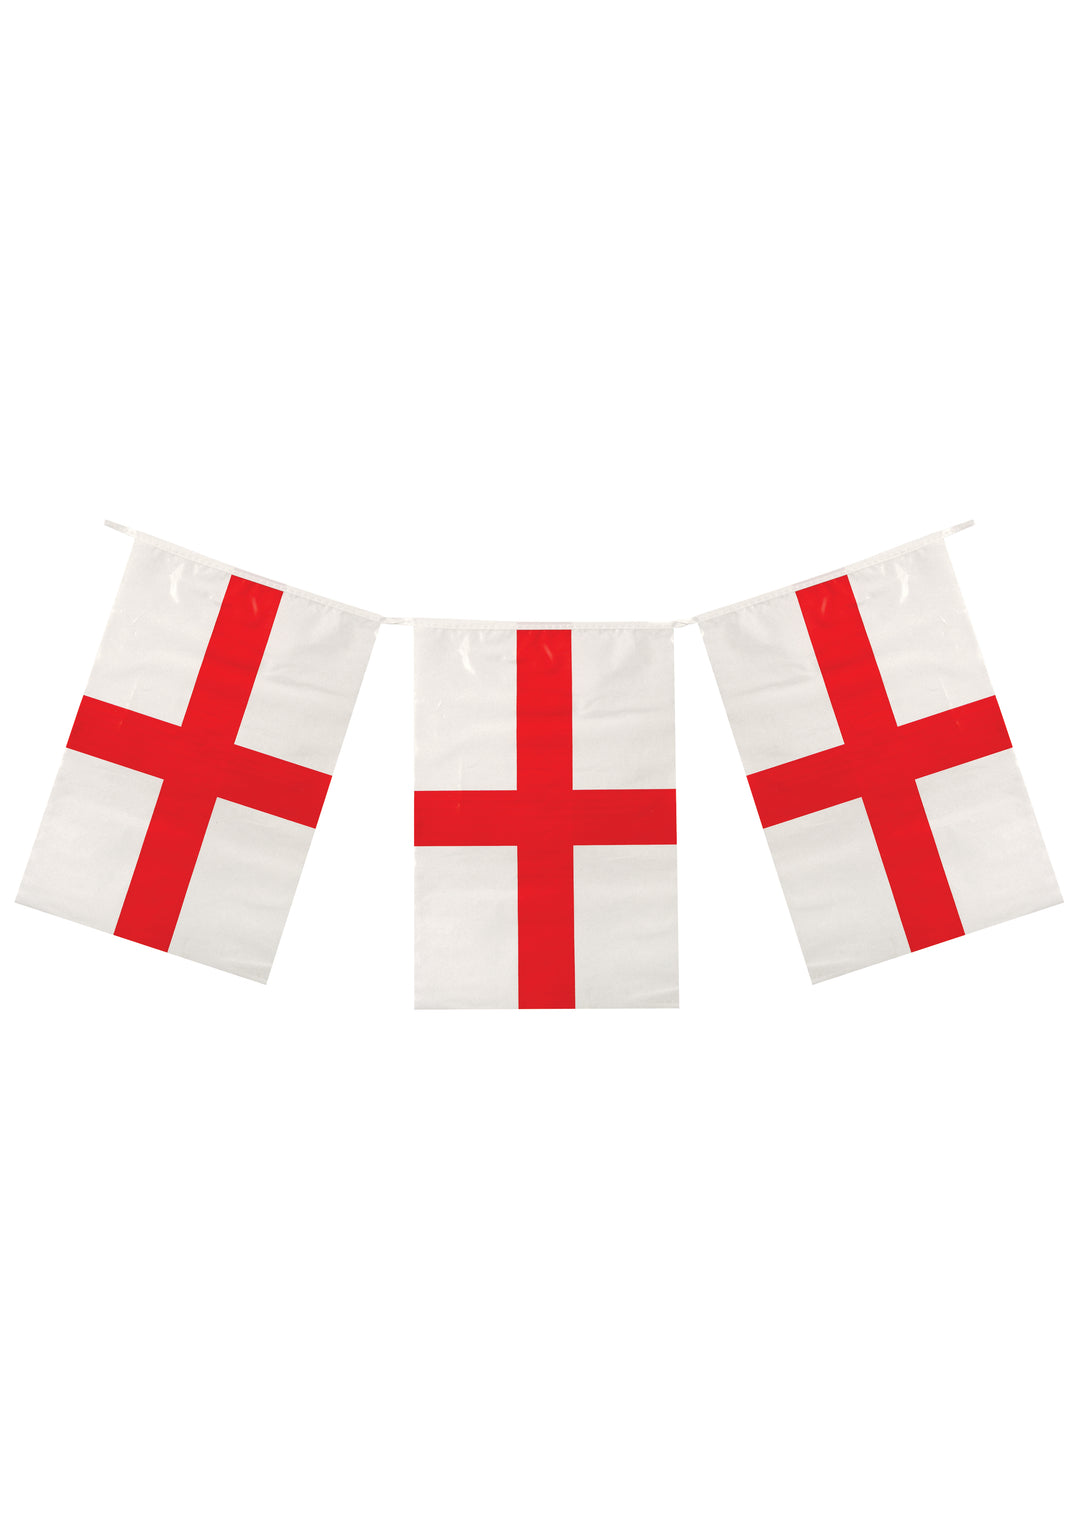 St George's Cross England Flag PVC Bunting 4m (11 Flags)